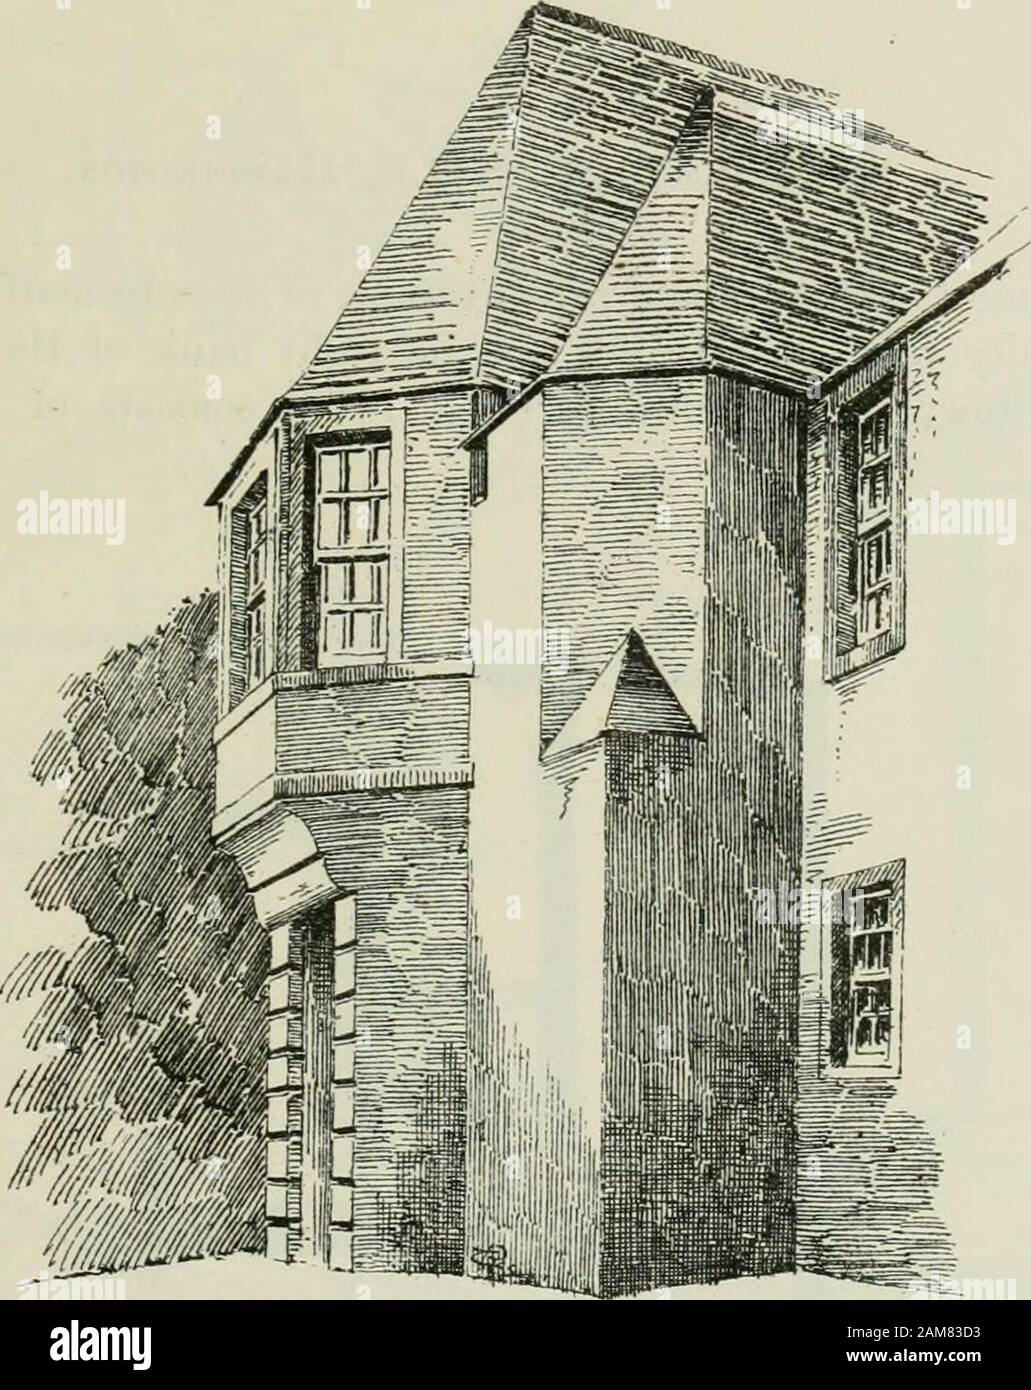 The castellated and domestic architecture of Scotland, from the twelfth to the eighteenth century . fiG. 1168.—Prestonpans. House at North-East of Parish Church. PRESTON PANS 57 FOURTH PERIOD stories in the garden at Preston Tower.* This arrangement provides thesame sort of accommodation as the outward projection, but in a differentmanner. The quarterings are sometimes filled in with clay and strawinstead of plaster. The house shown in Fig. 1168 is situated to the north-east of the parishchurch of Prestonpans, the spire of which is seen in the distance. This. Fio. llt)9.—Prestonpans. House nea Stock Photo